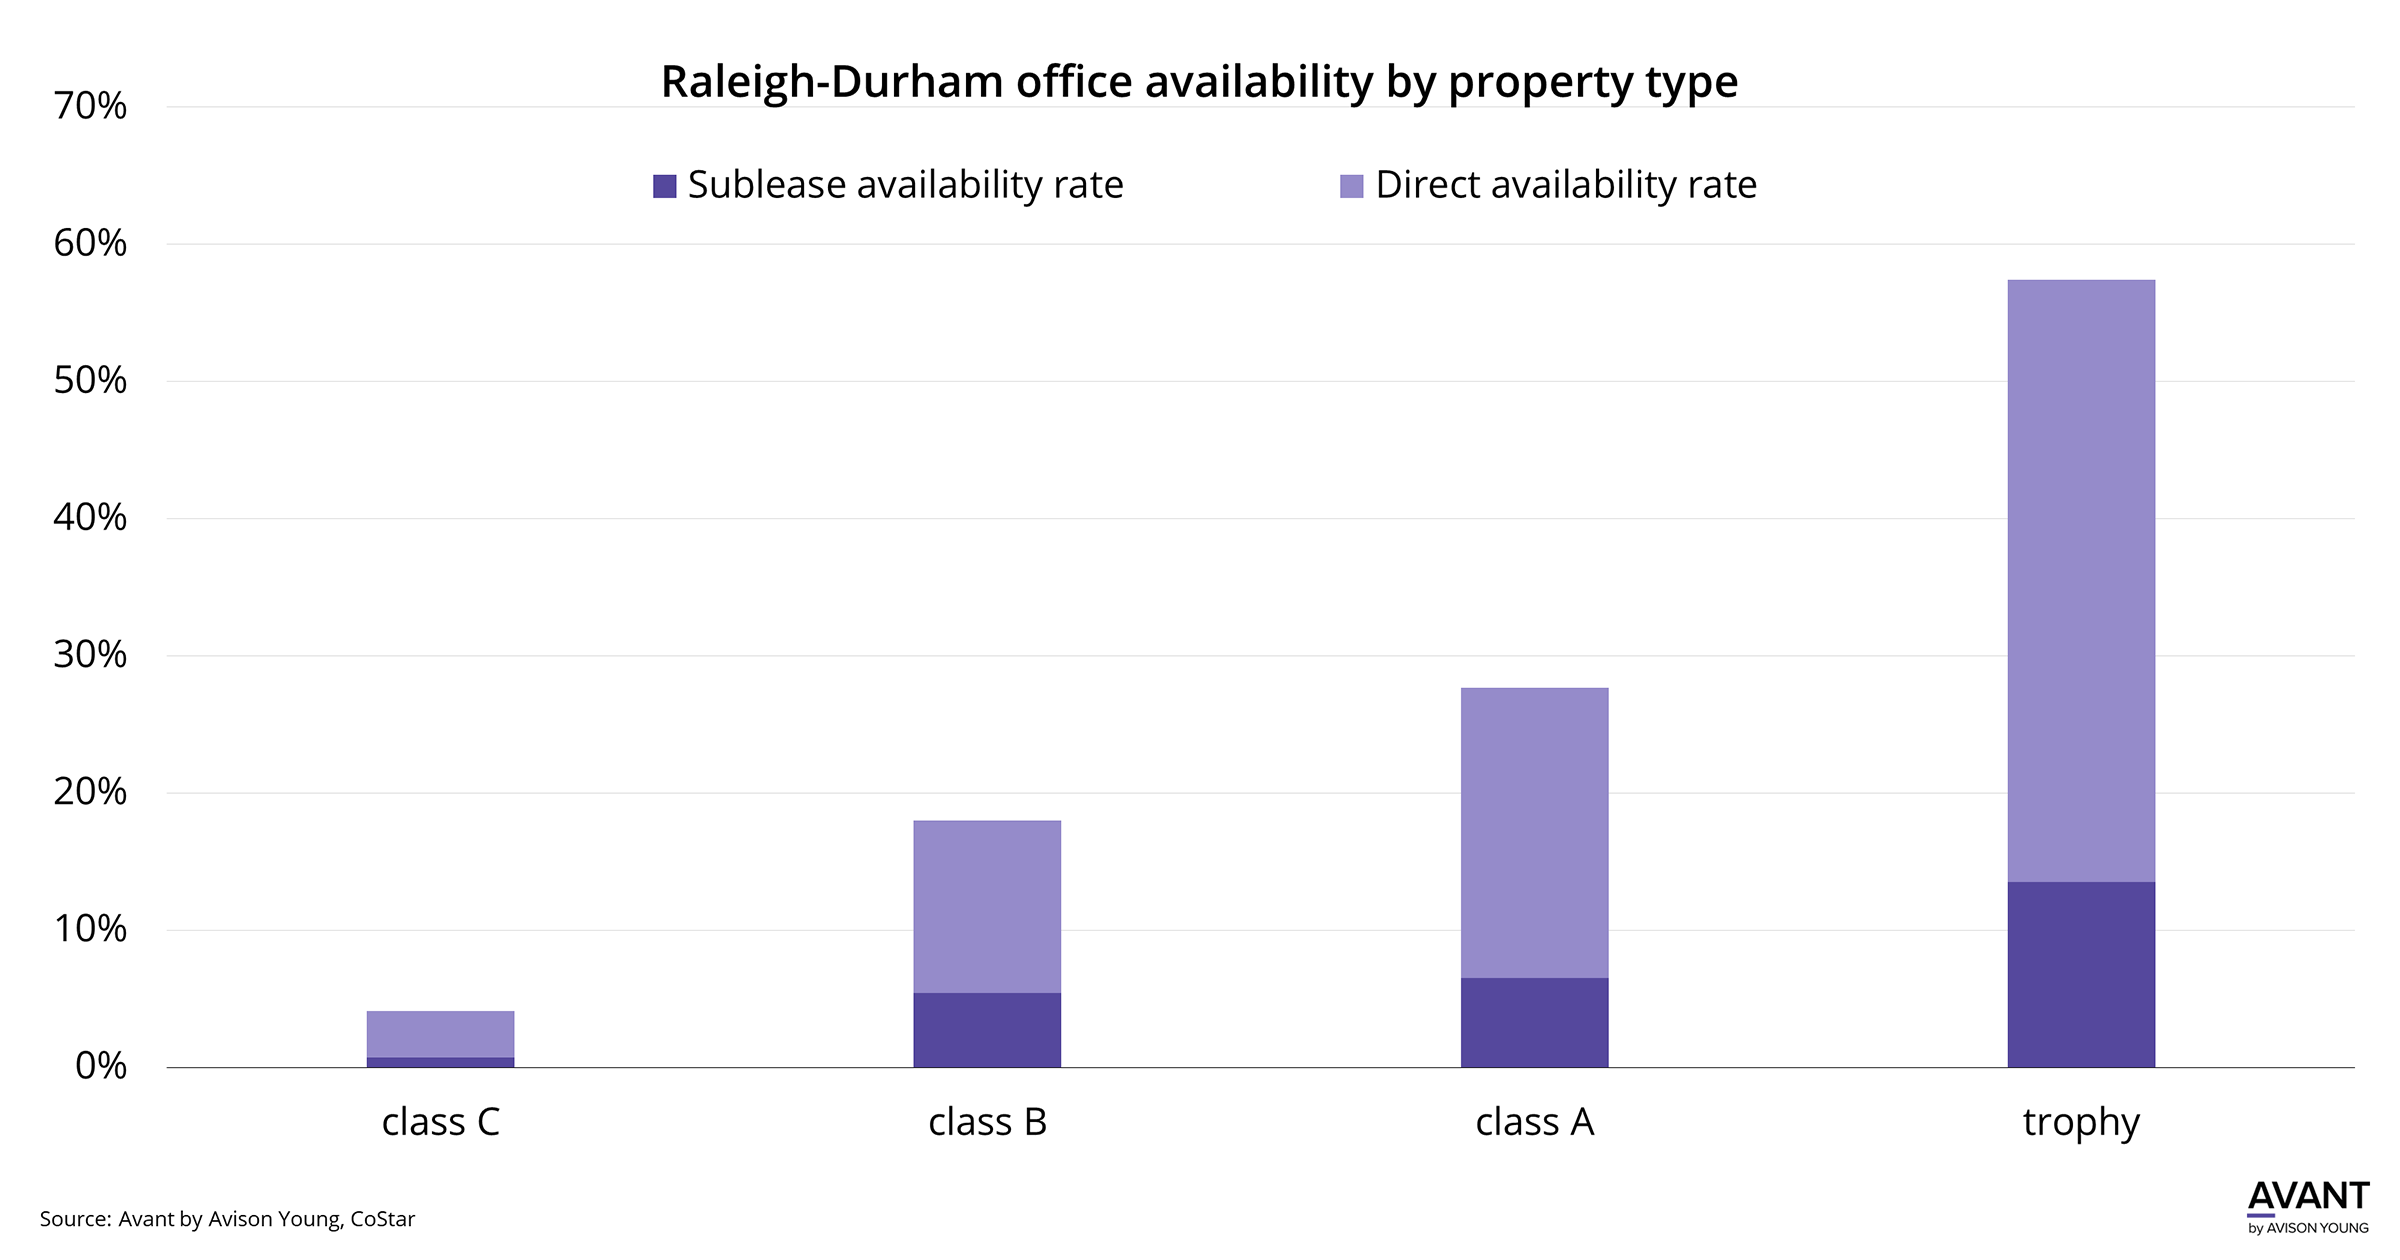 Graph of Raleigh-Durham office availability by property type Trophy, class A, B and C